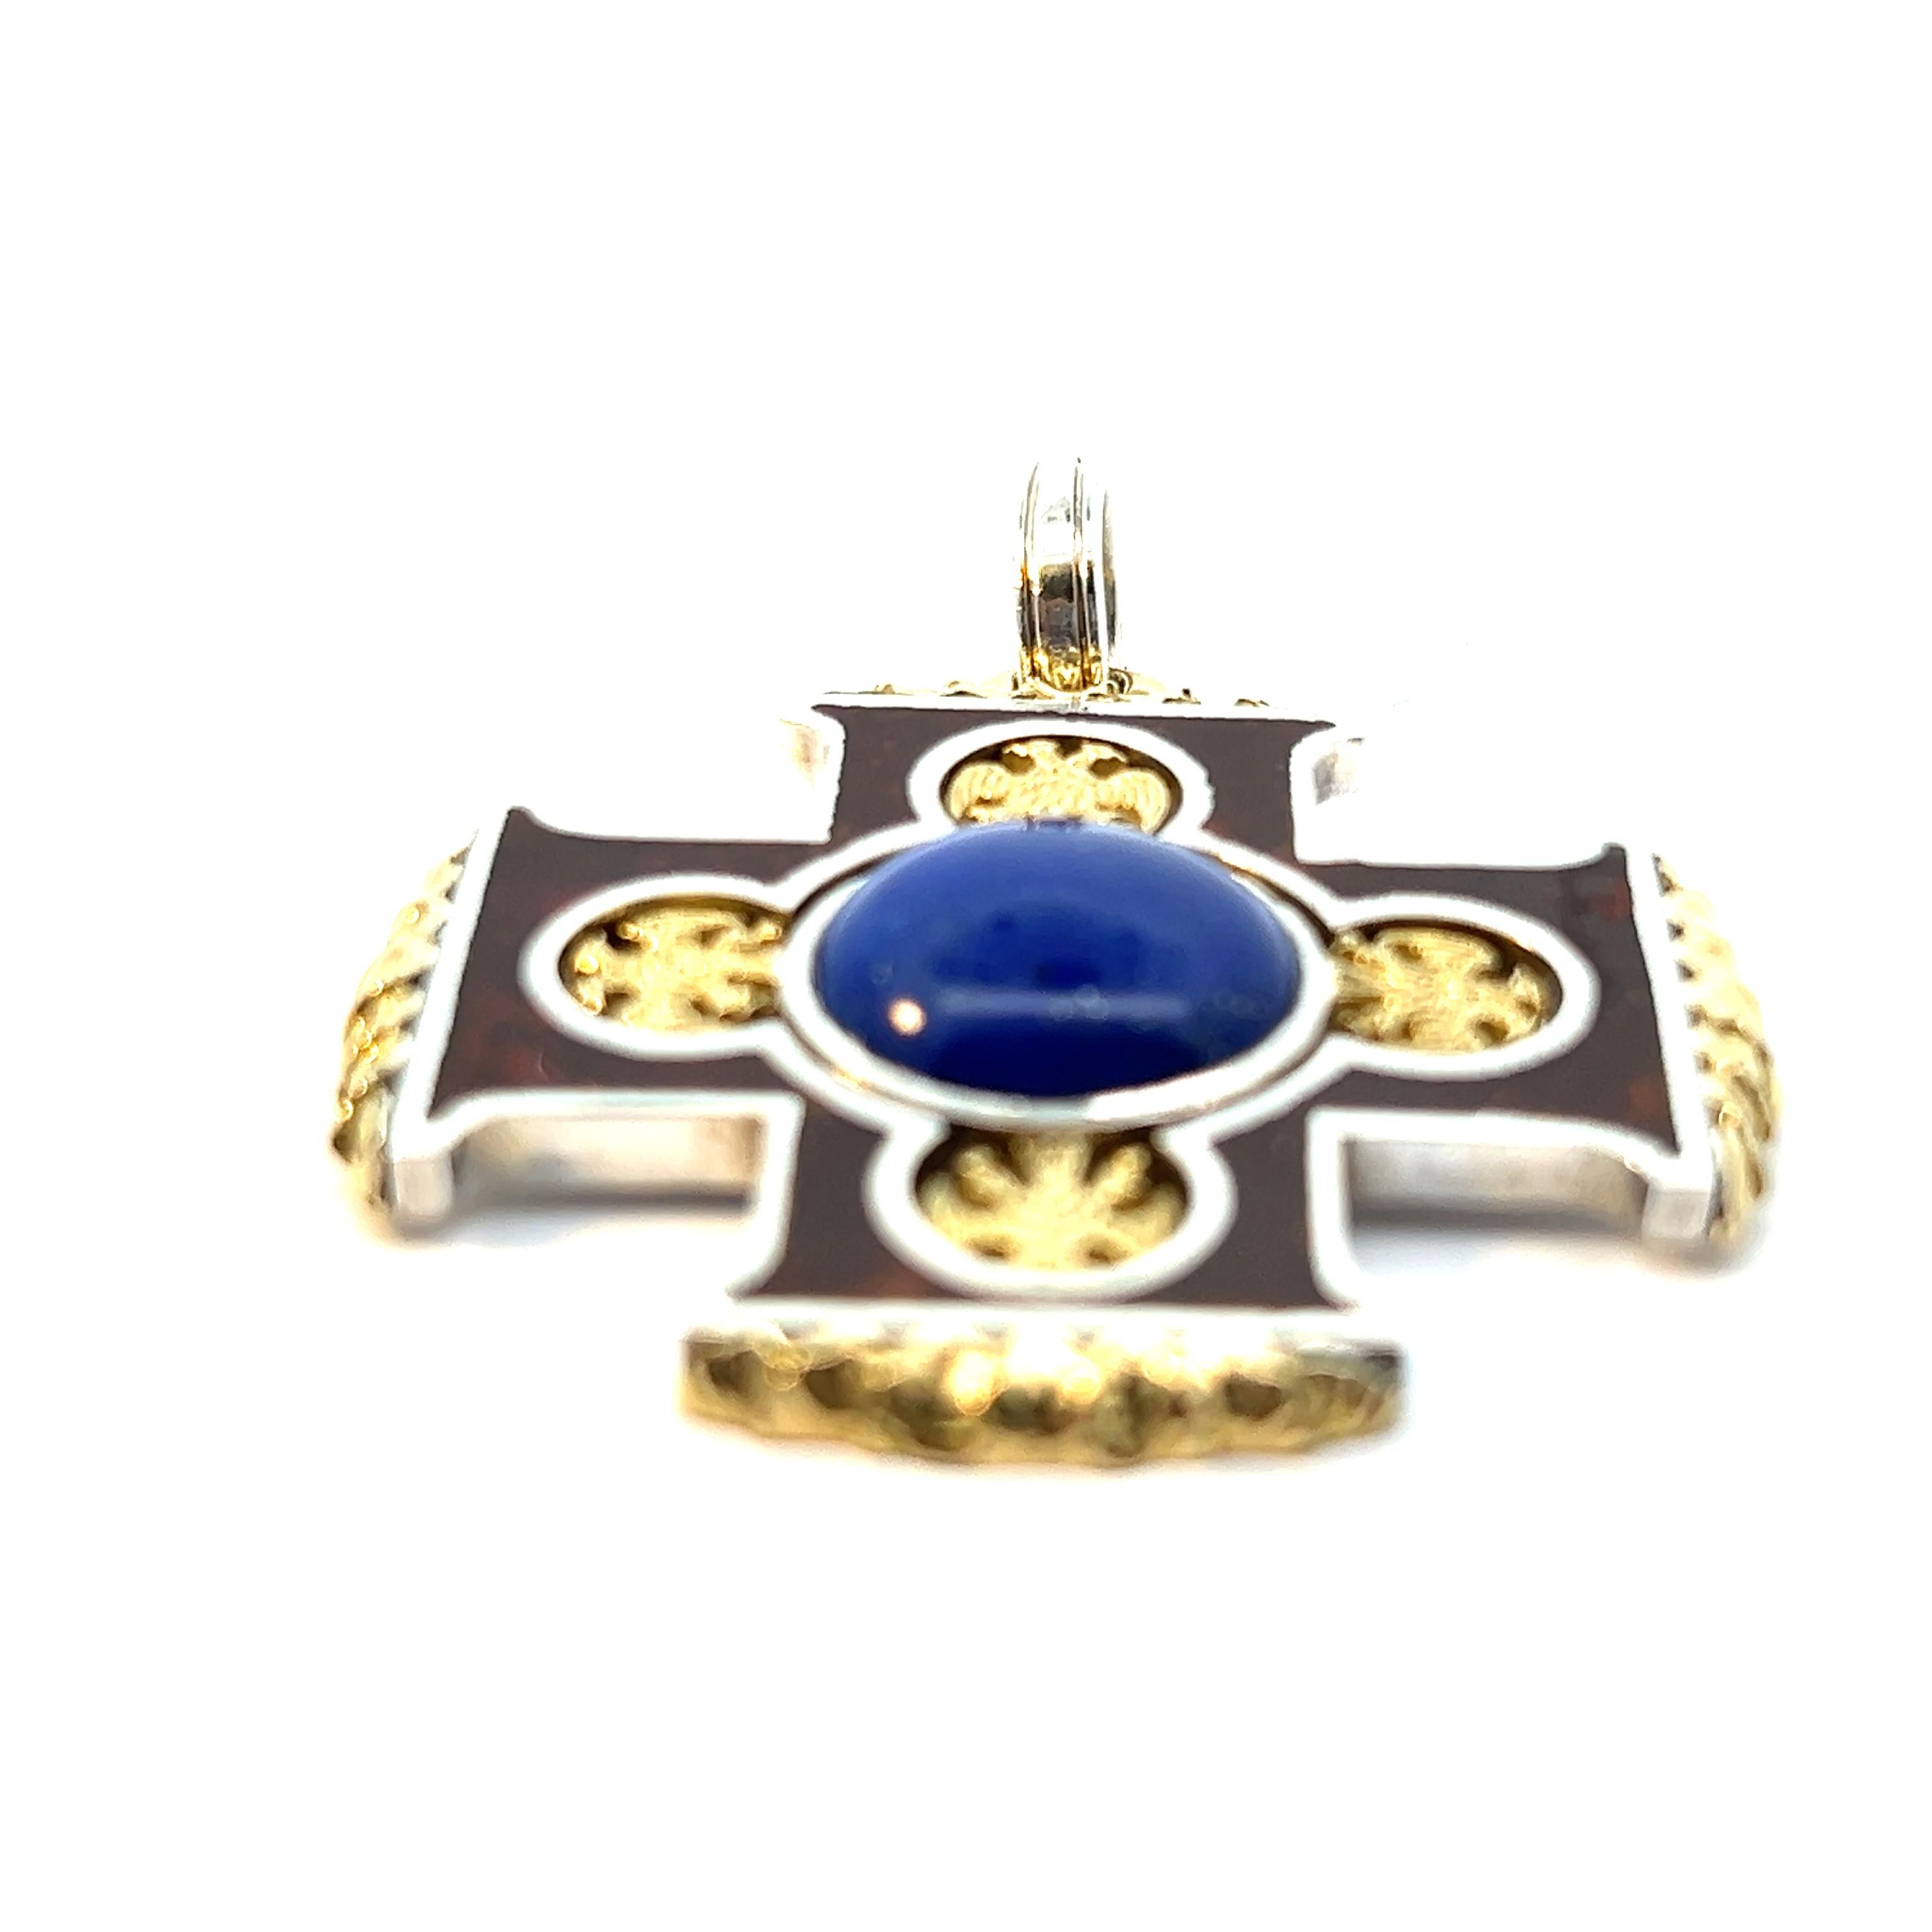 Behold the emblem of divinity and valor, forged from the finest materials and imbued with symbolic significance that transcends mere ornamentation. This cross pendant, crafted meticulously from sterling silver and adorned with resplendent 18k yellow